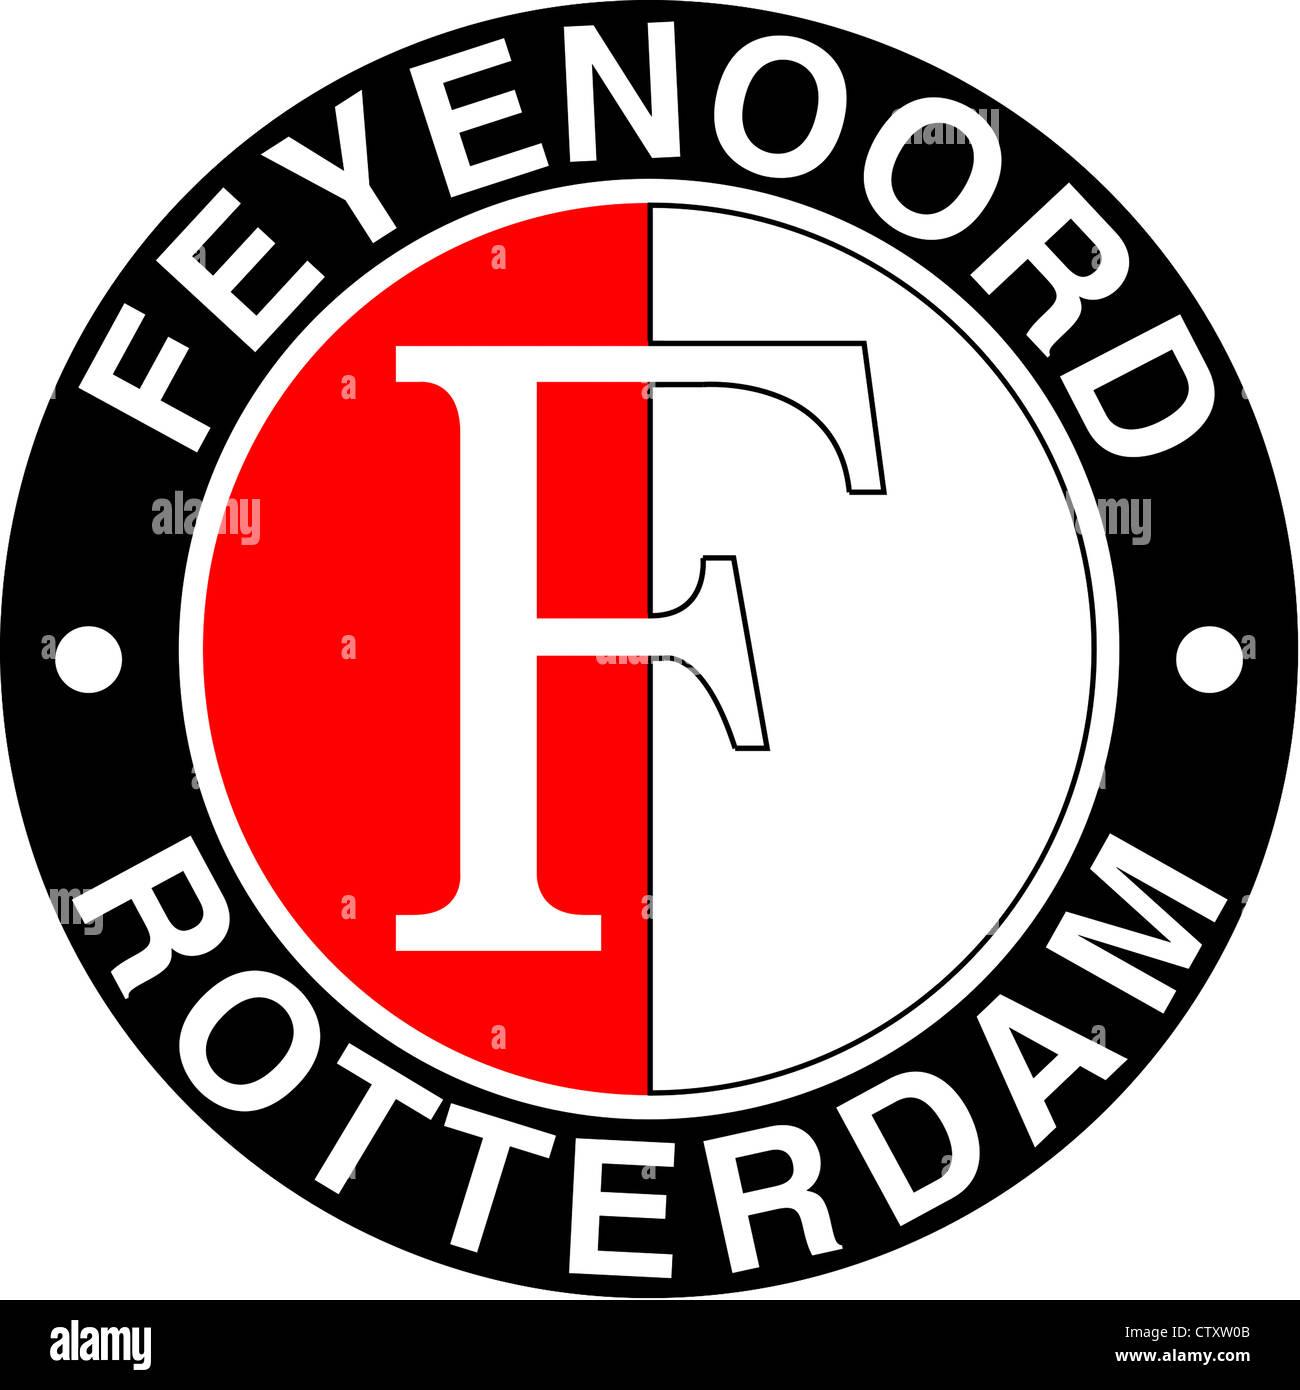 - Analysis of Feyenoord Deal and Its Implications for Liverpool